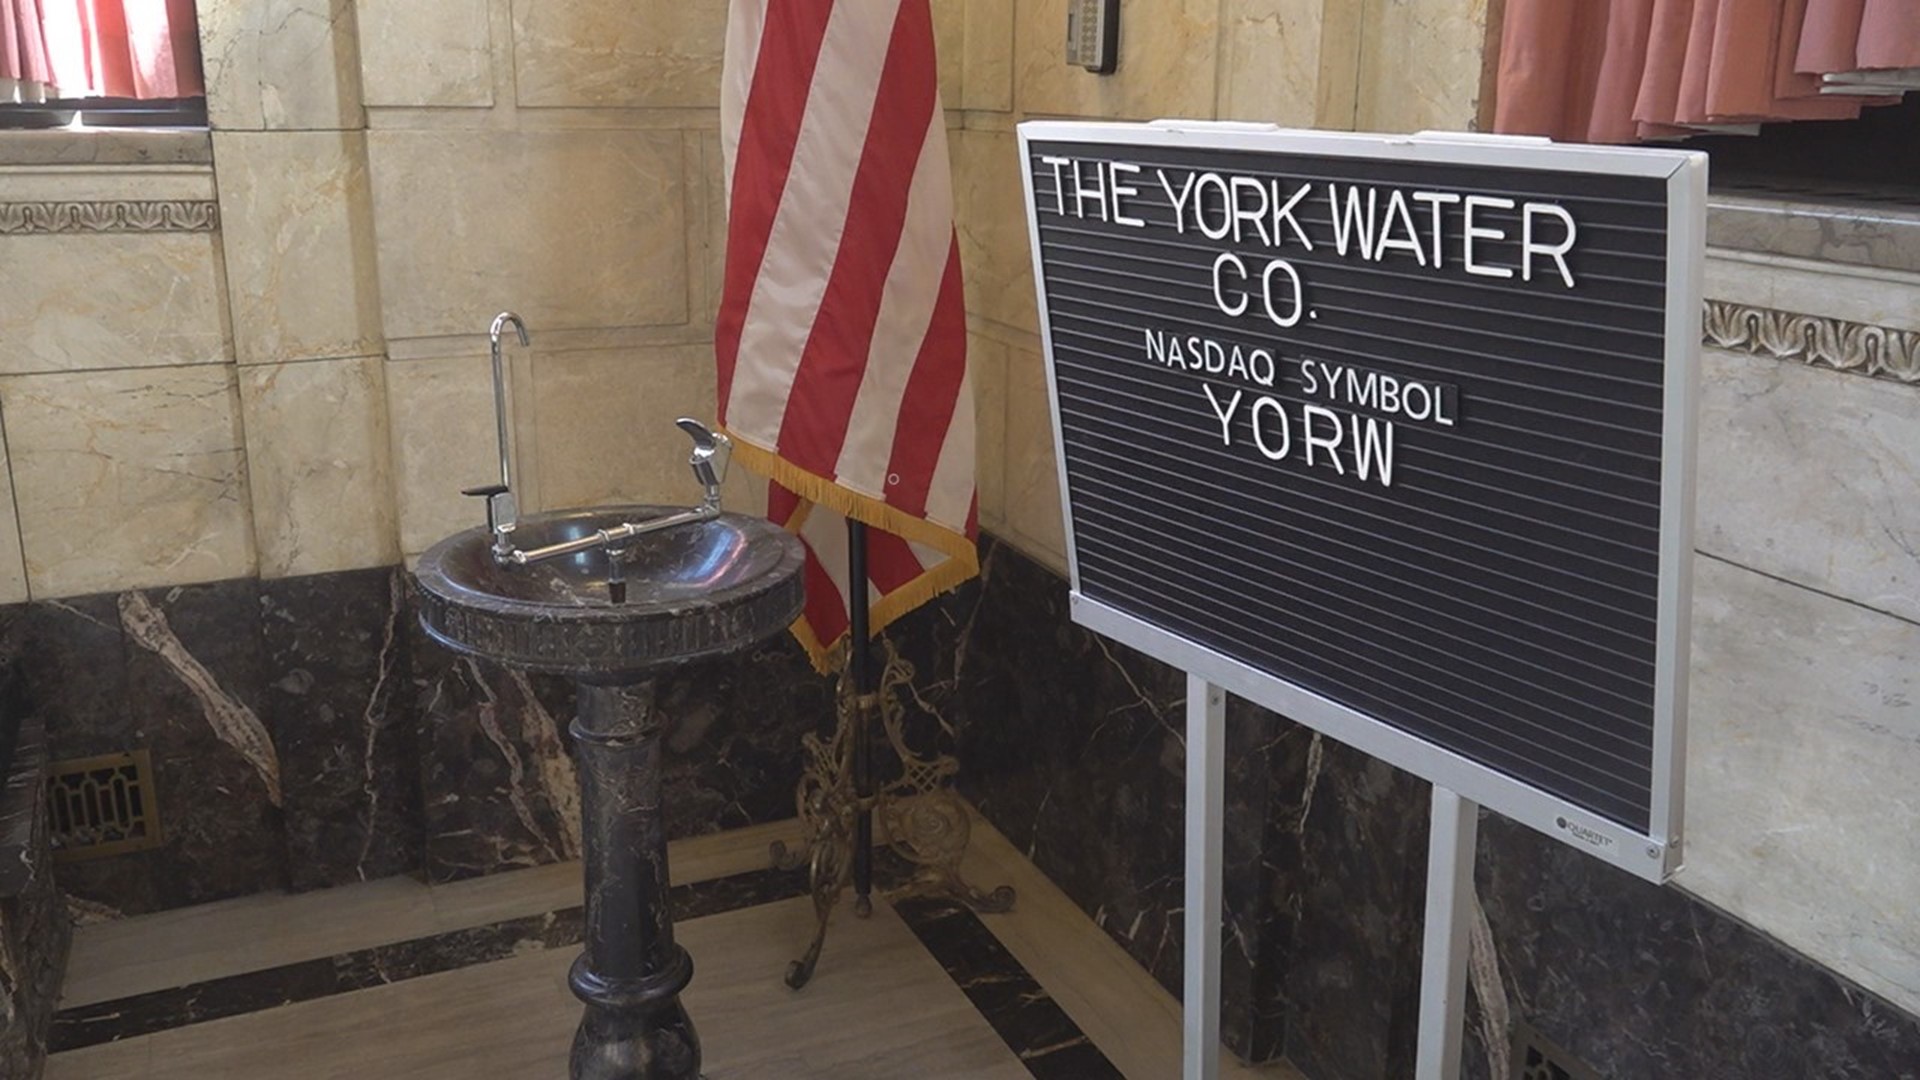 While an EPA report highlights how far Pennsylvania has to go before lead pipes are gone, the York-based water service provider said it's ahead of the curve.